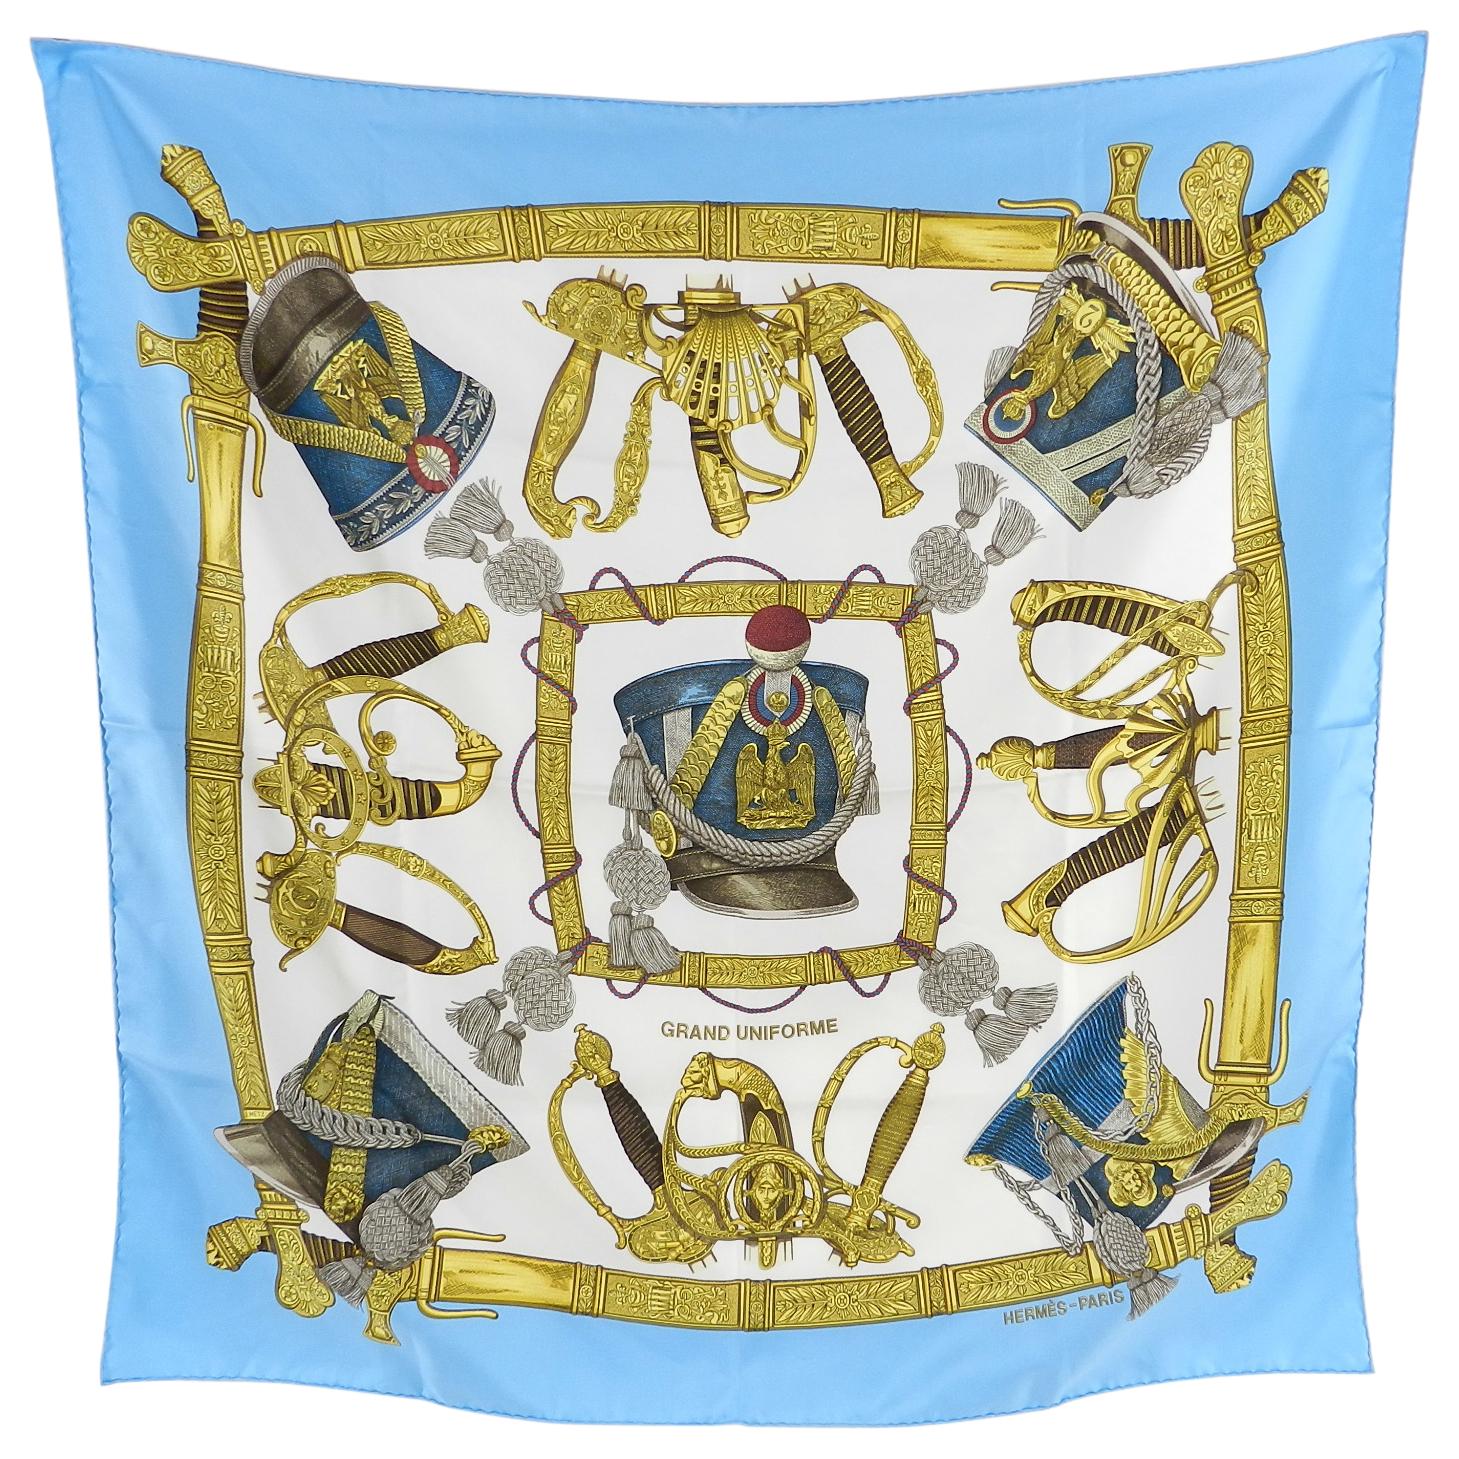 Hermes Grand Uniforme 90cm Scarf.  Designed by J. Metz. 90cm silk twill with hand rolled and stitched edges. Design with military hats in light baby blue, white, and yellow.  Excellent pre-owned condition. No box. 
